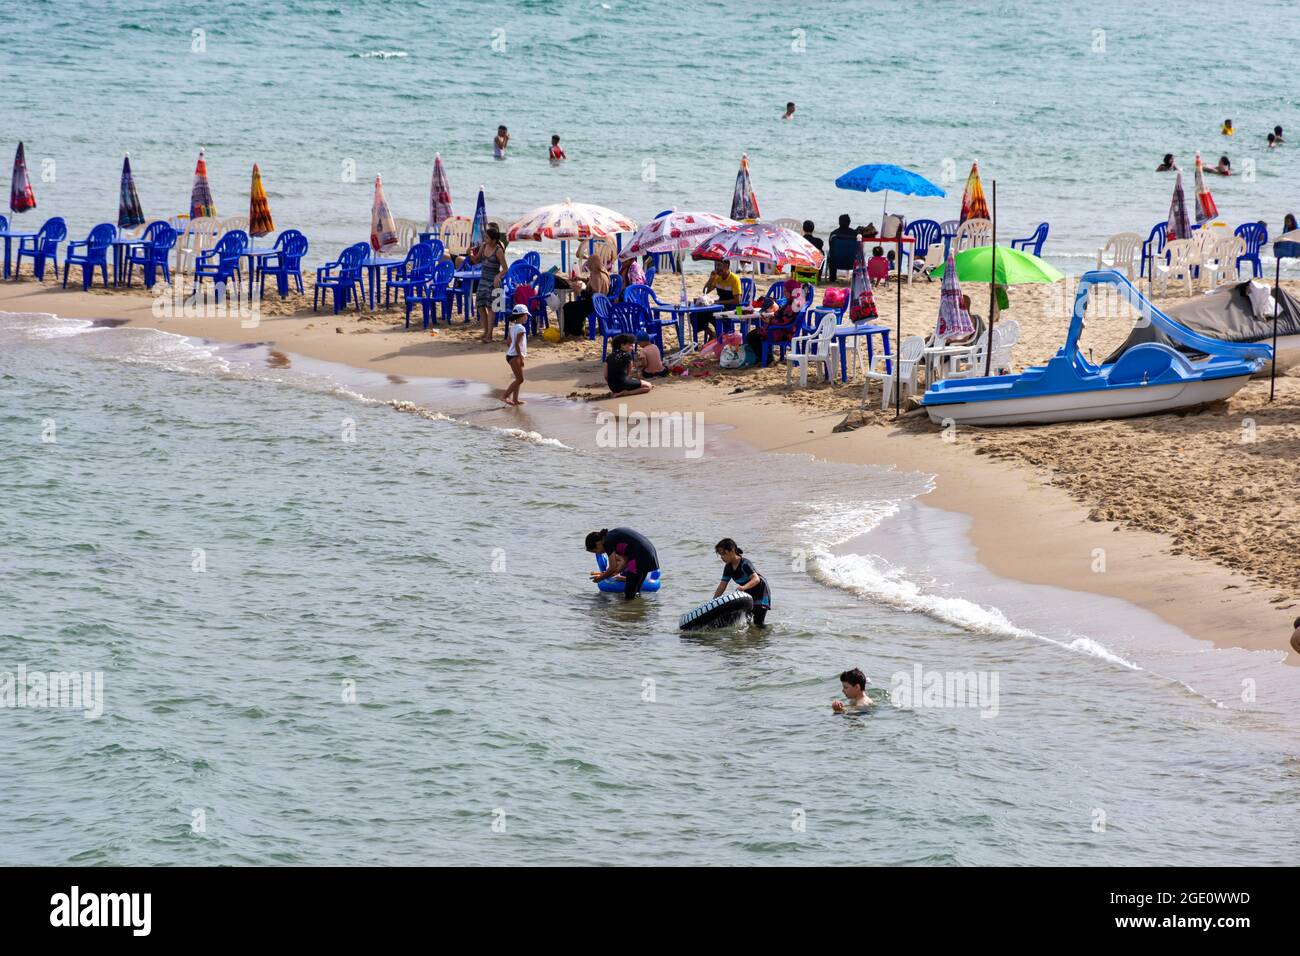 High-angle view of kids playing in the water and having fun on the beach, Skikda, Algeria. Stock Photo